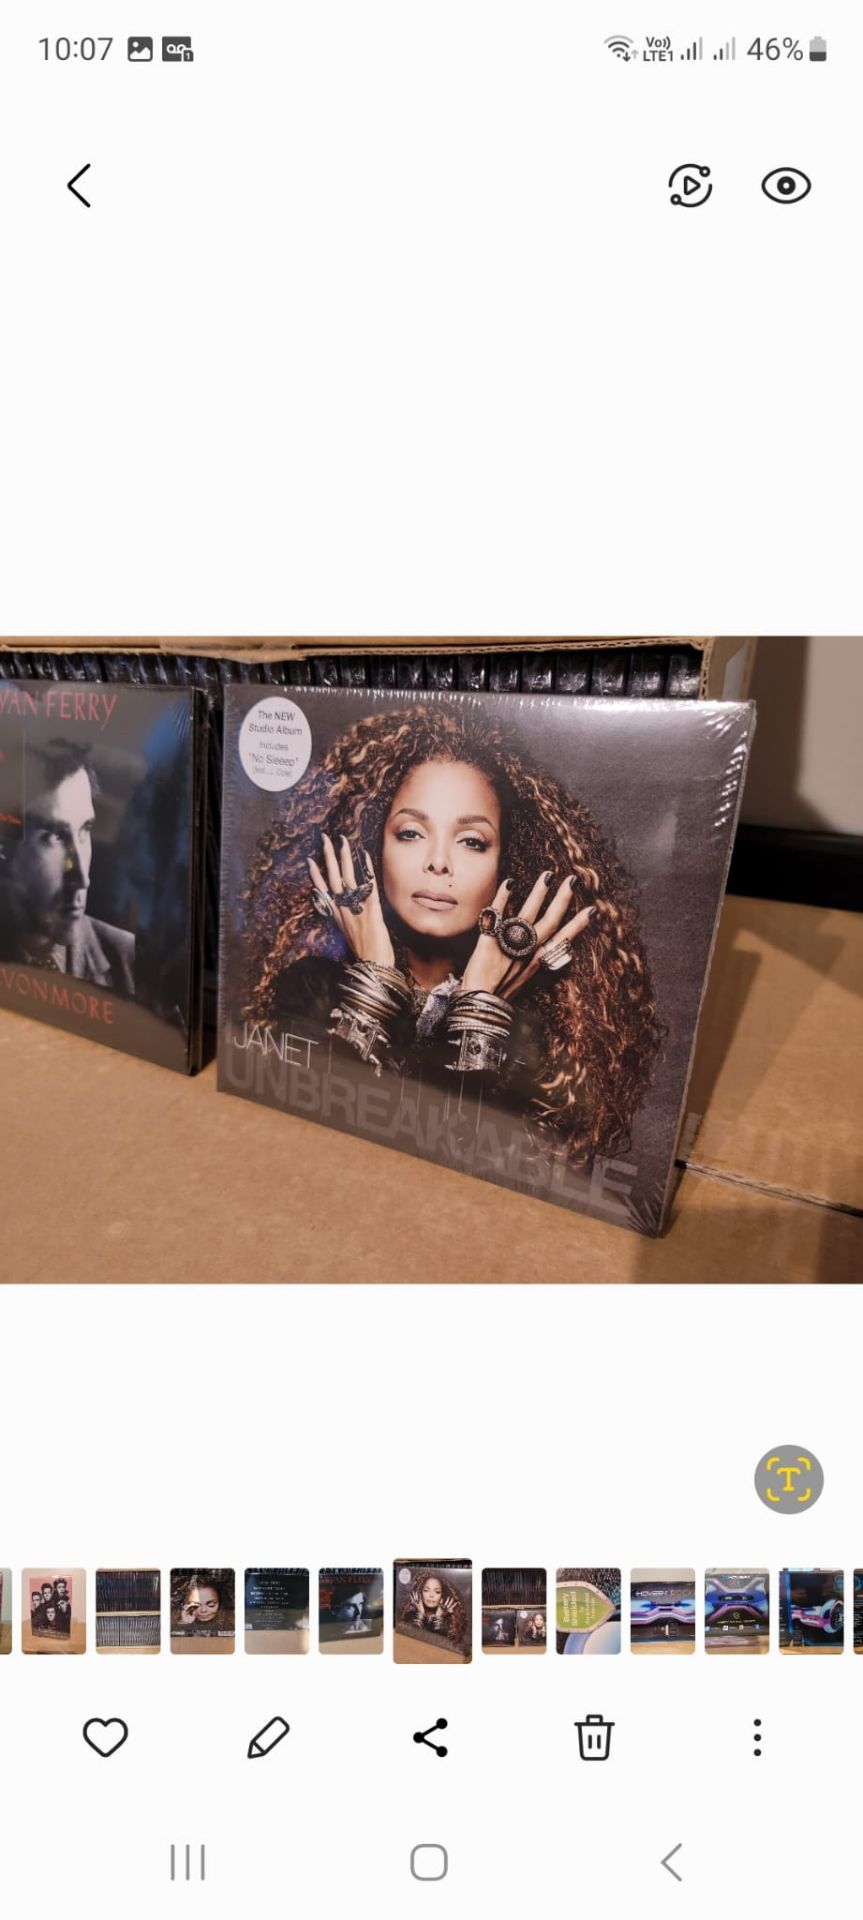 CD Janet Jackson and Brain Ferry x 6000 - Image 2 of 10